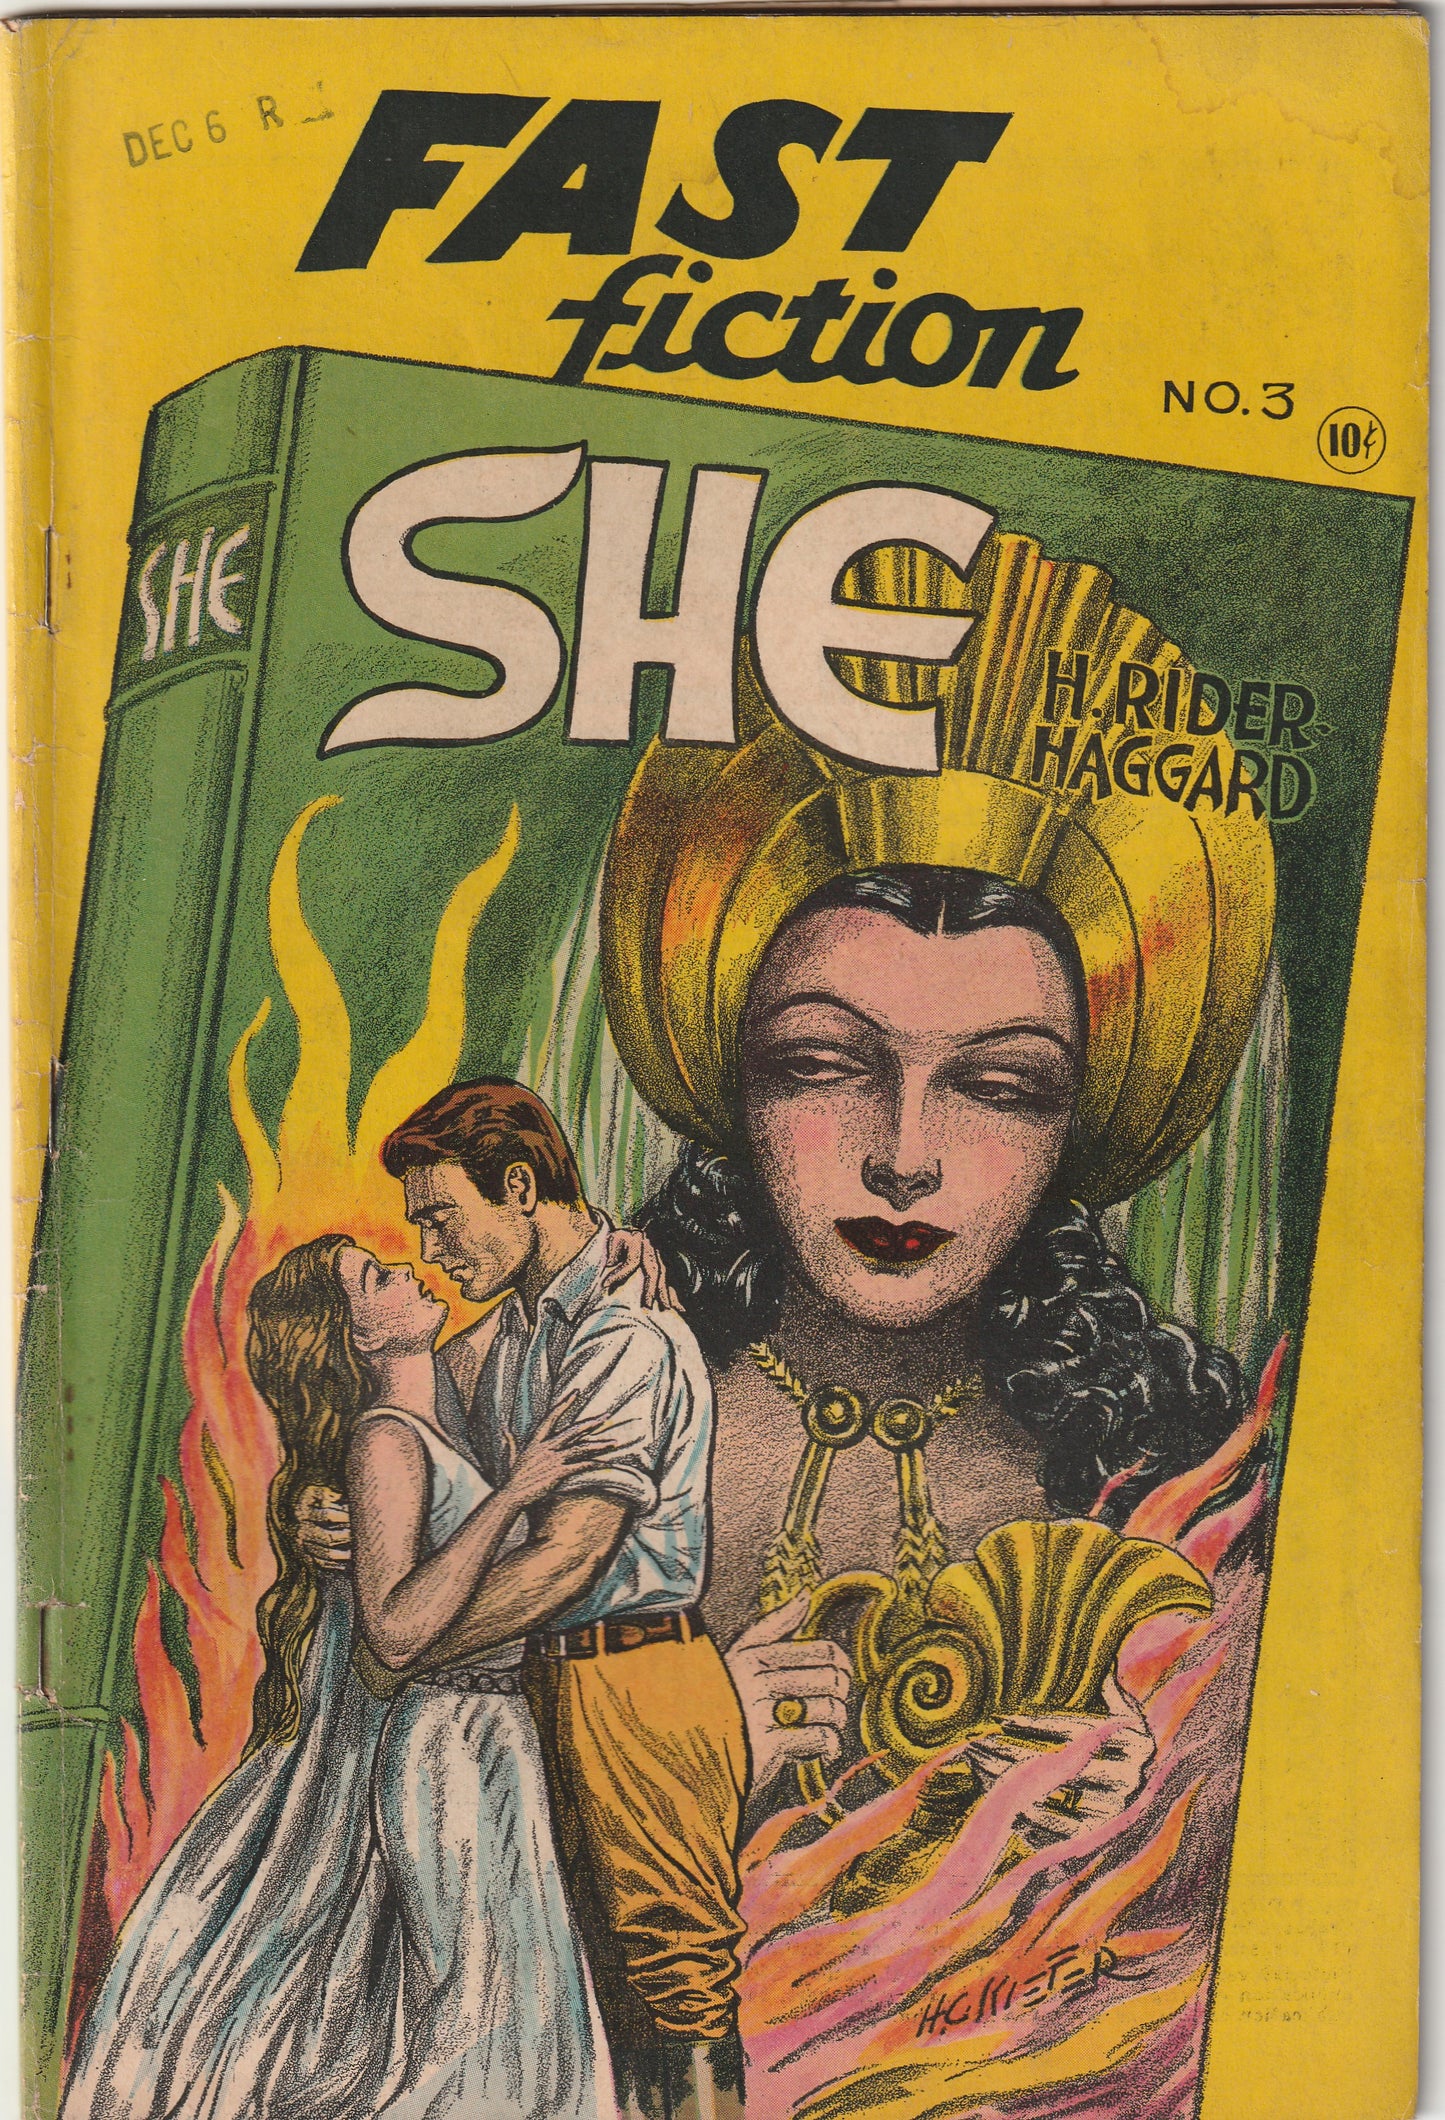 Fast Fiction #3 (1949) - SHE by H. Rider Haggard